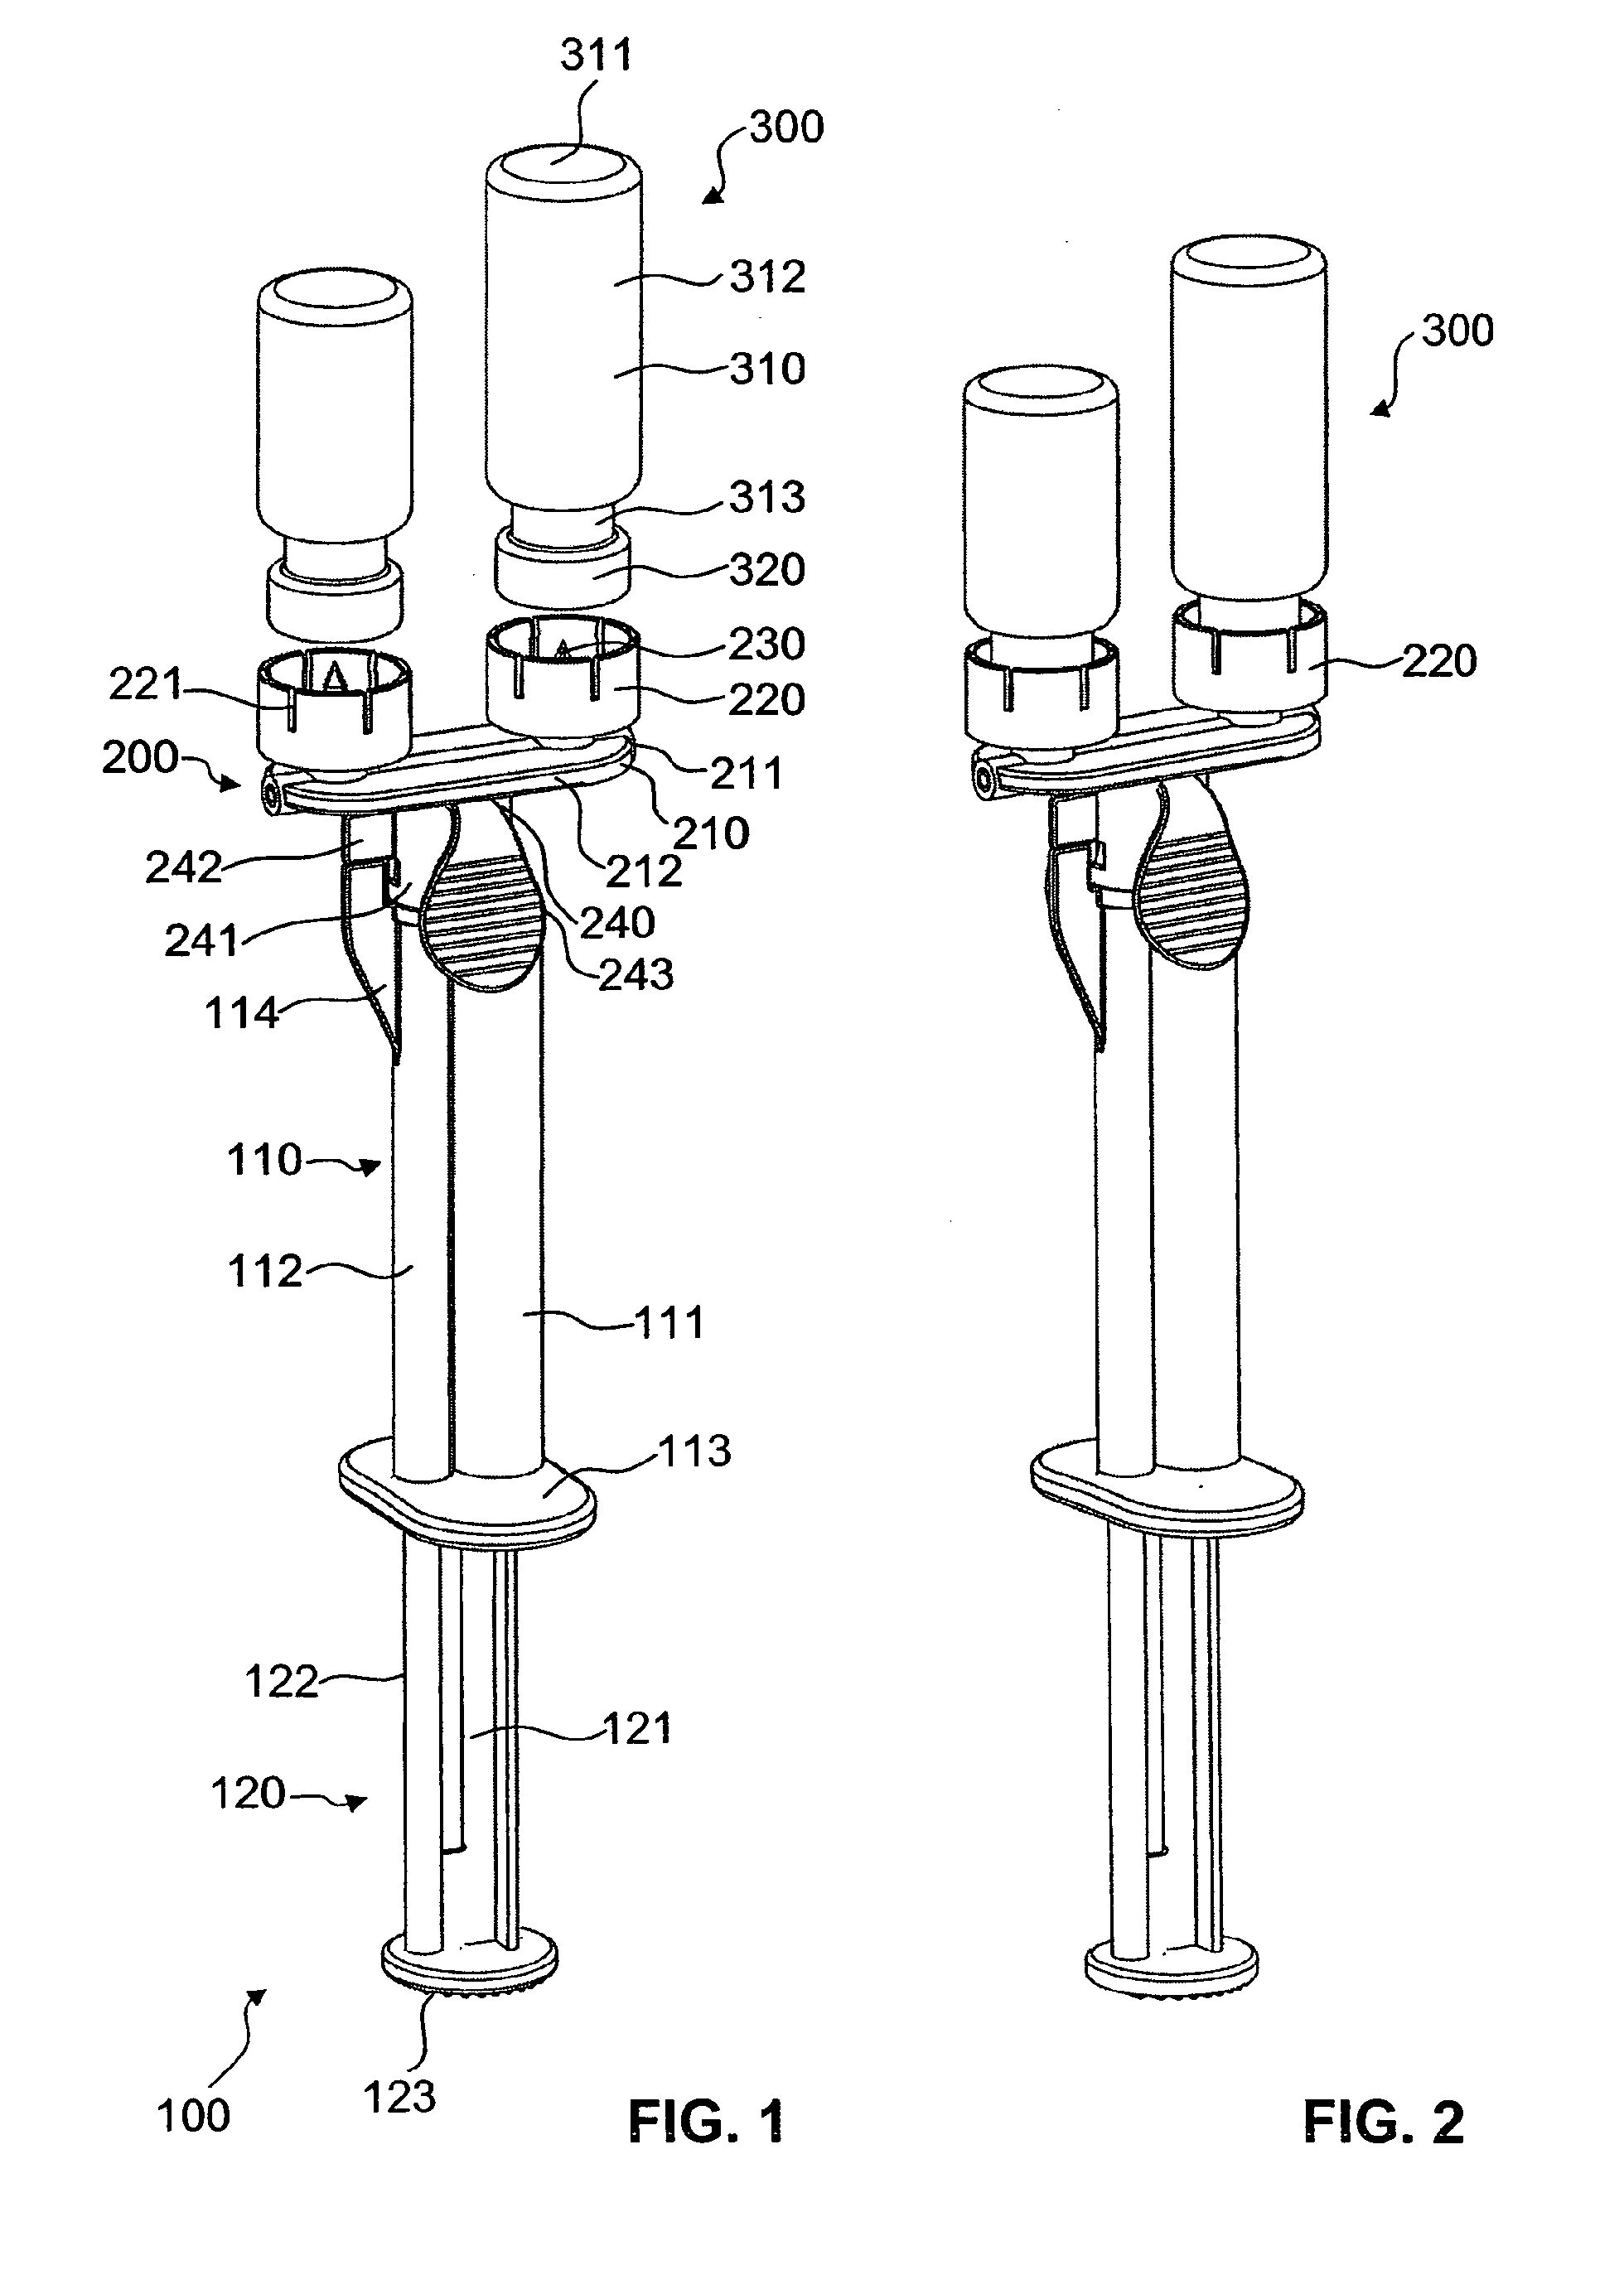 Device for removing fluids from vials